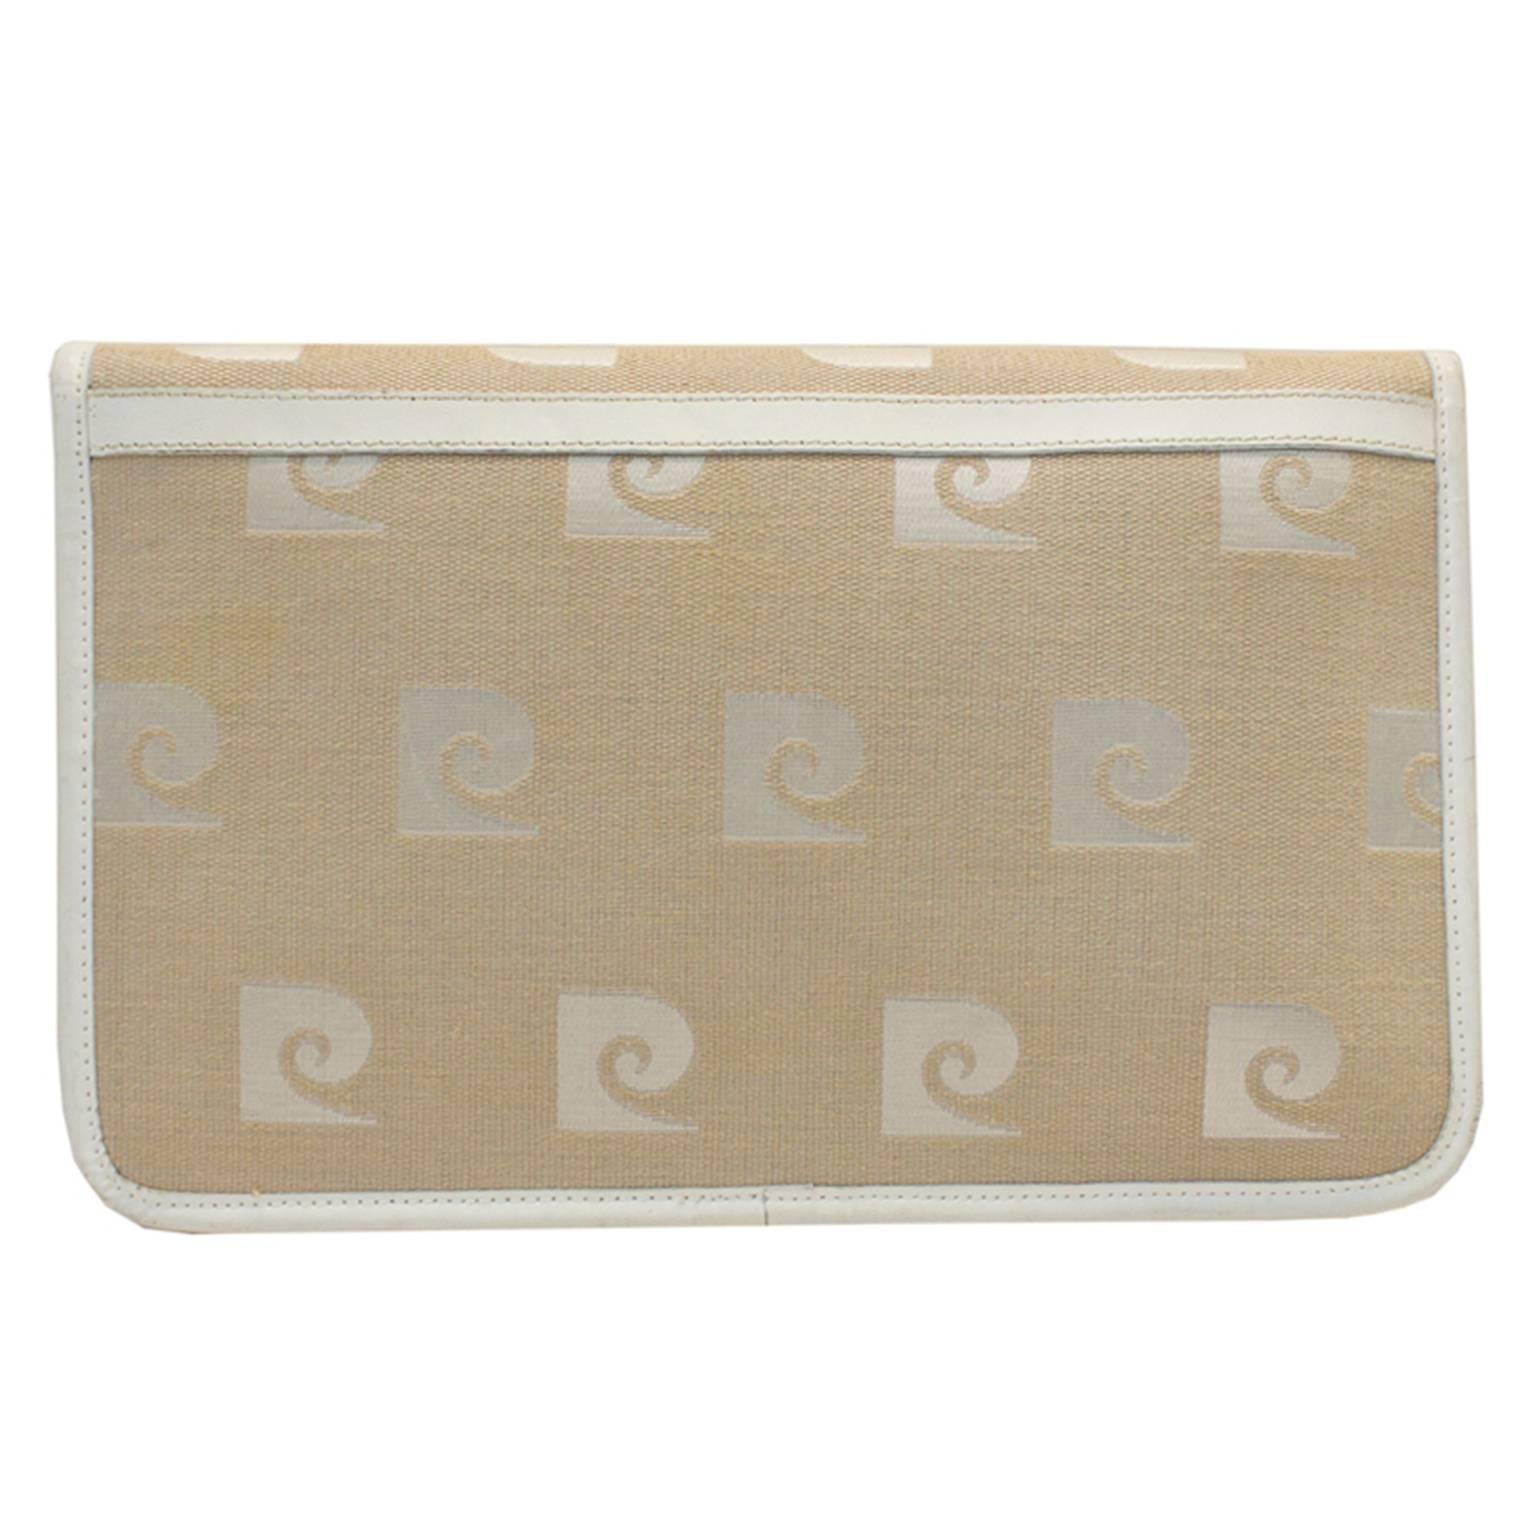 1960s Pierre Cardin Beige Logo Jacquard Clutch  In Excellent Condition For Sale In Toronto, Ontario